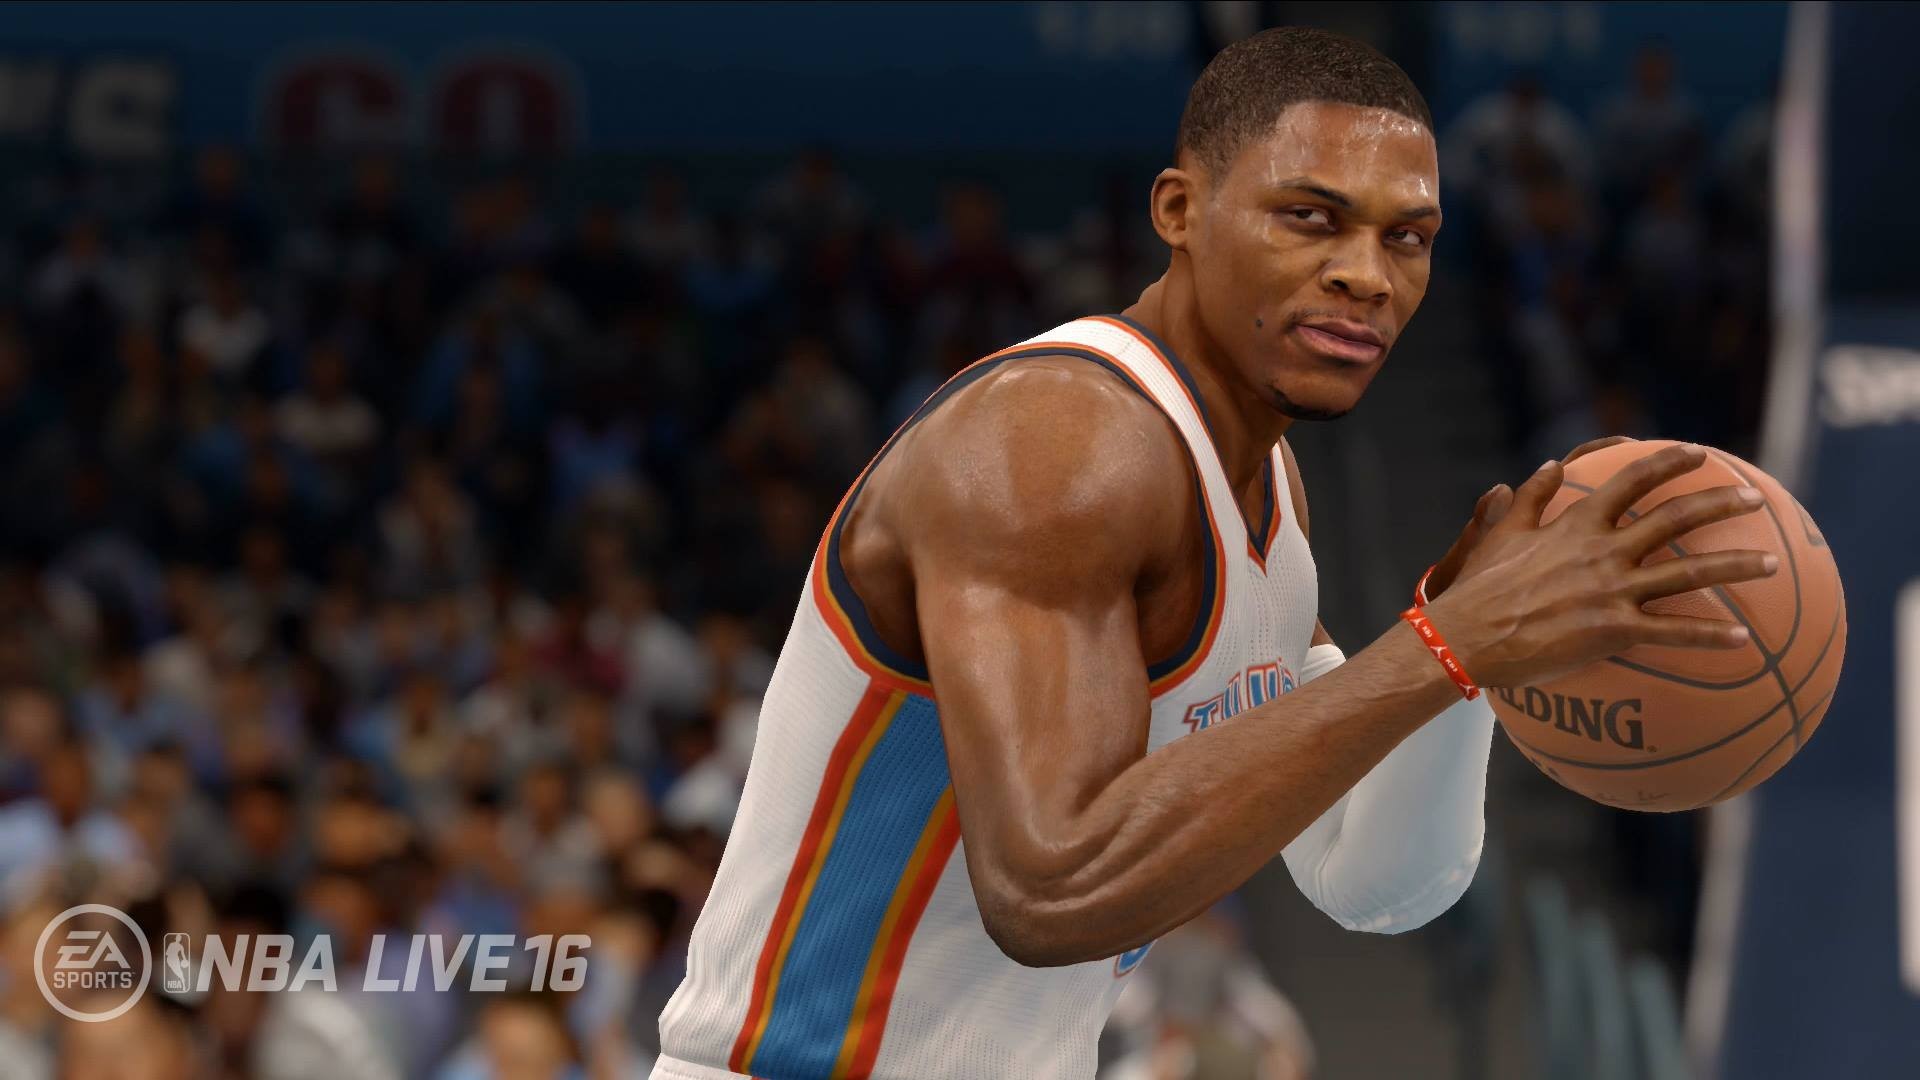 Another NBA Live 16 Screenshot of Russell Westbrook